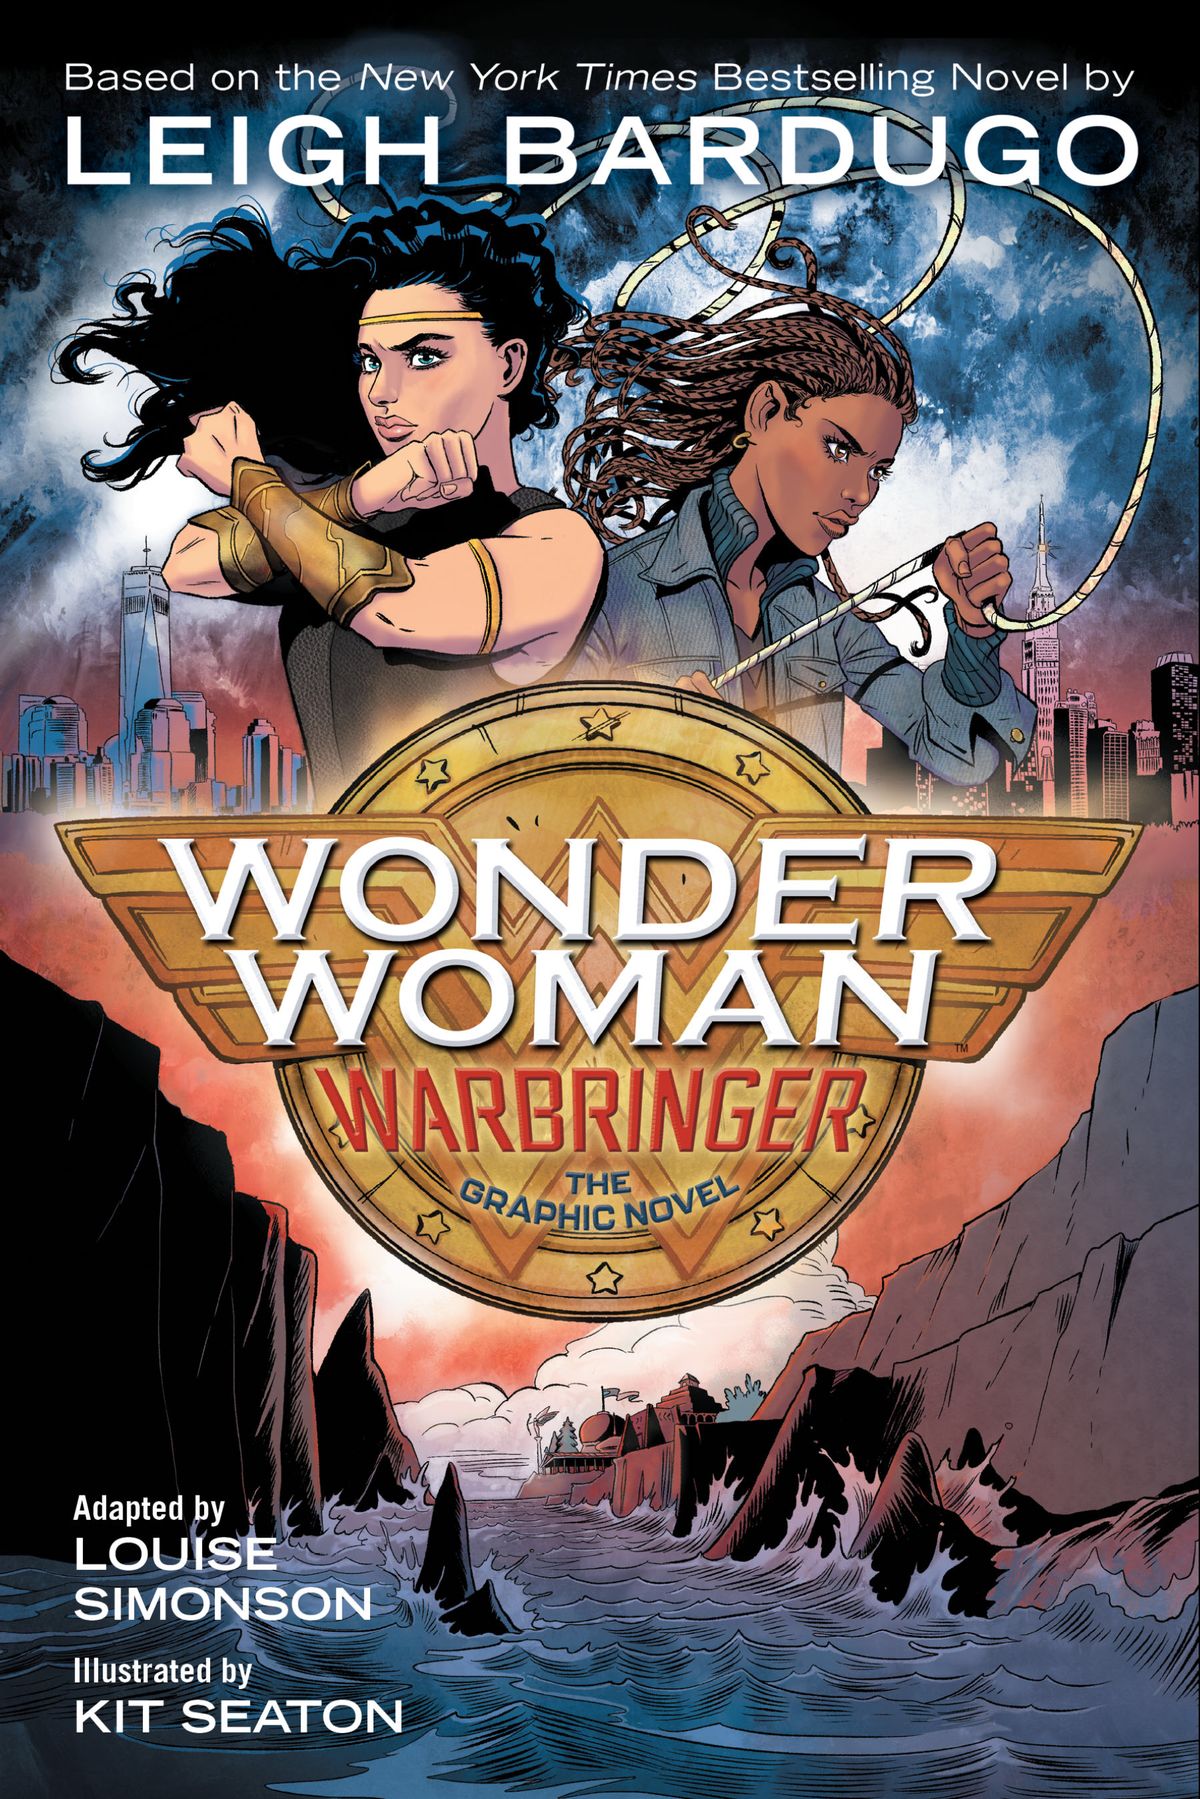 Wonder Woman and Alia square up for battle on the cover of Wonder Woman: Warbringer, the graphic novel. 